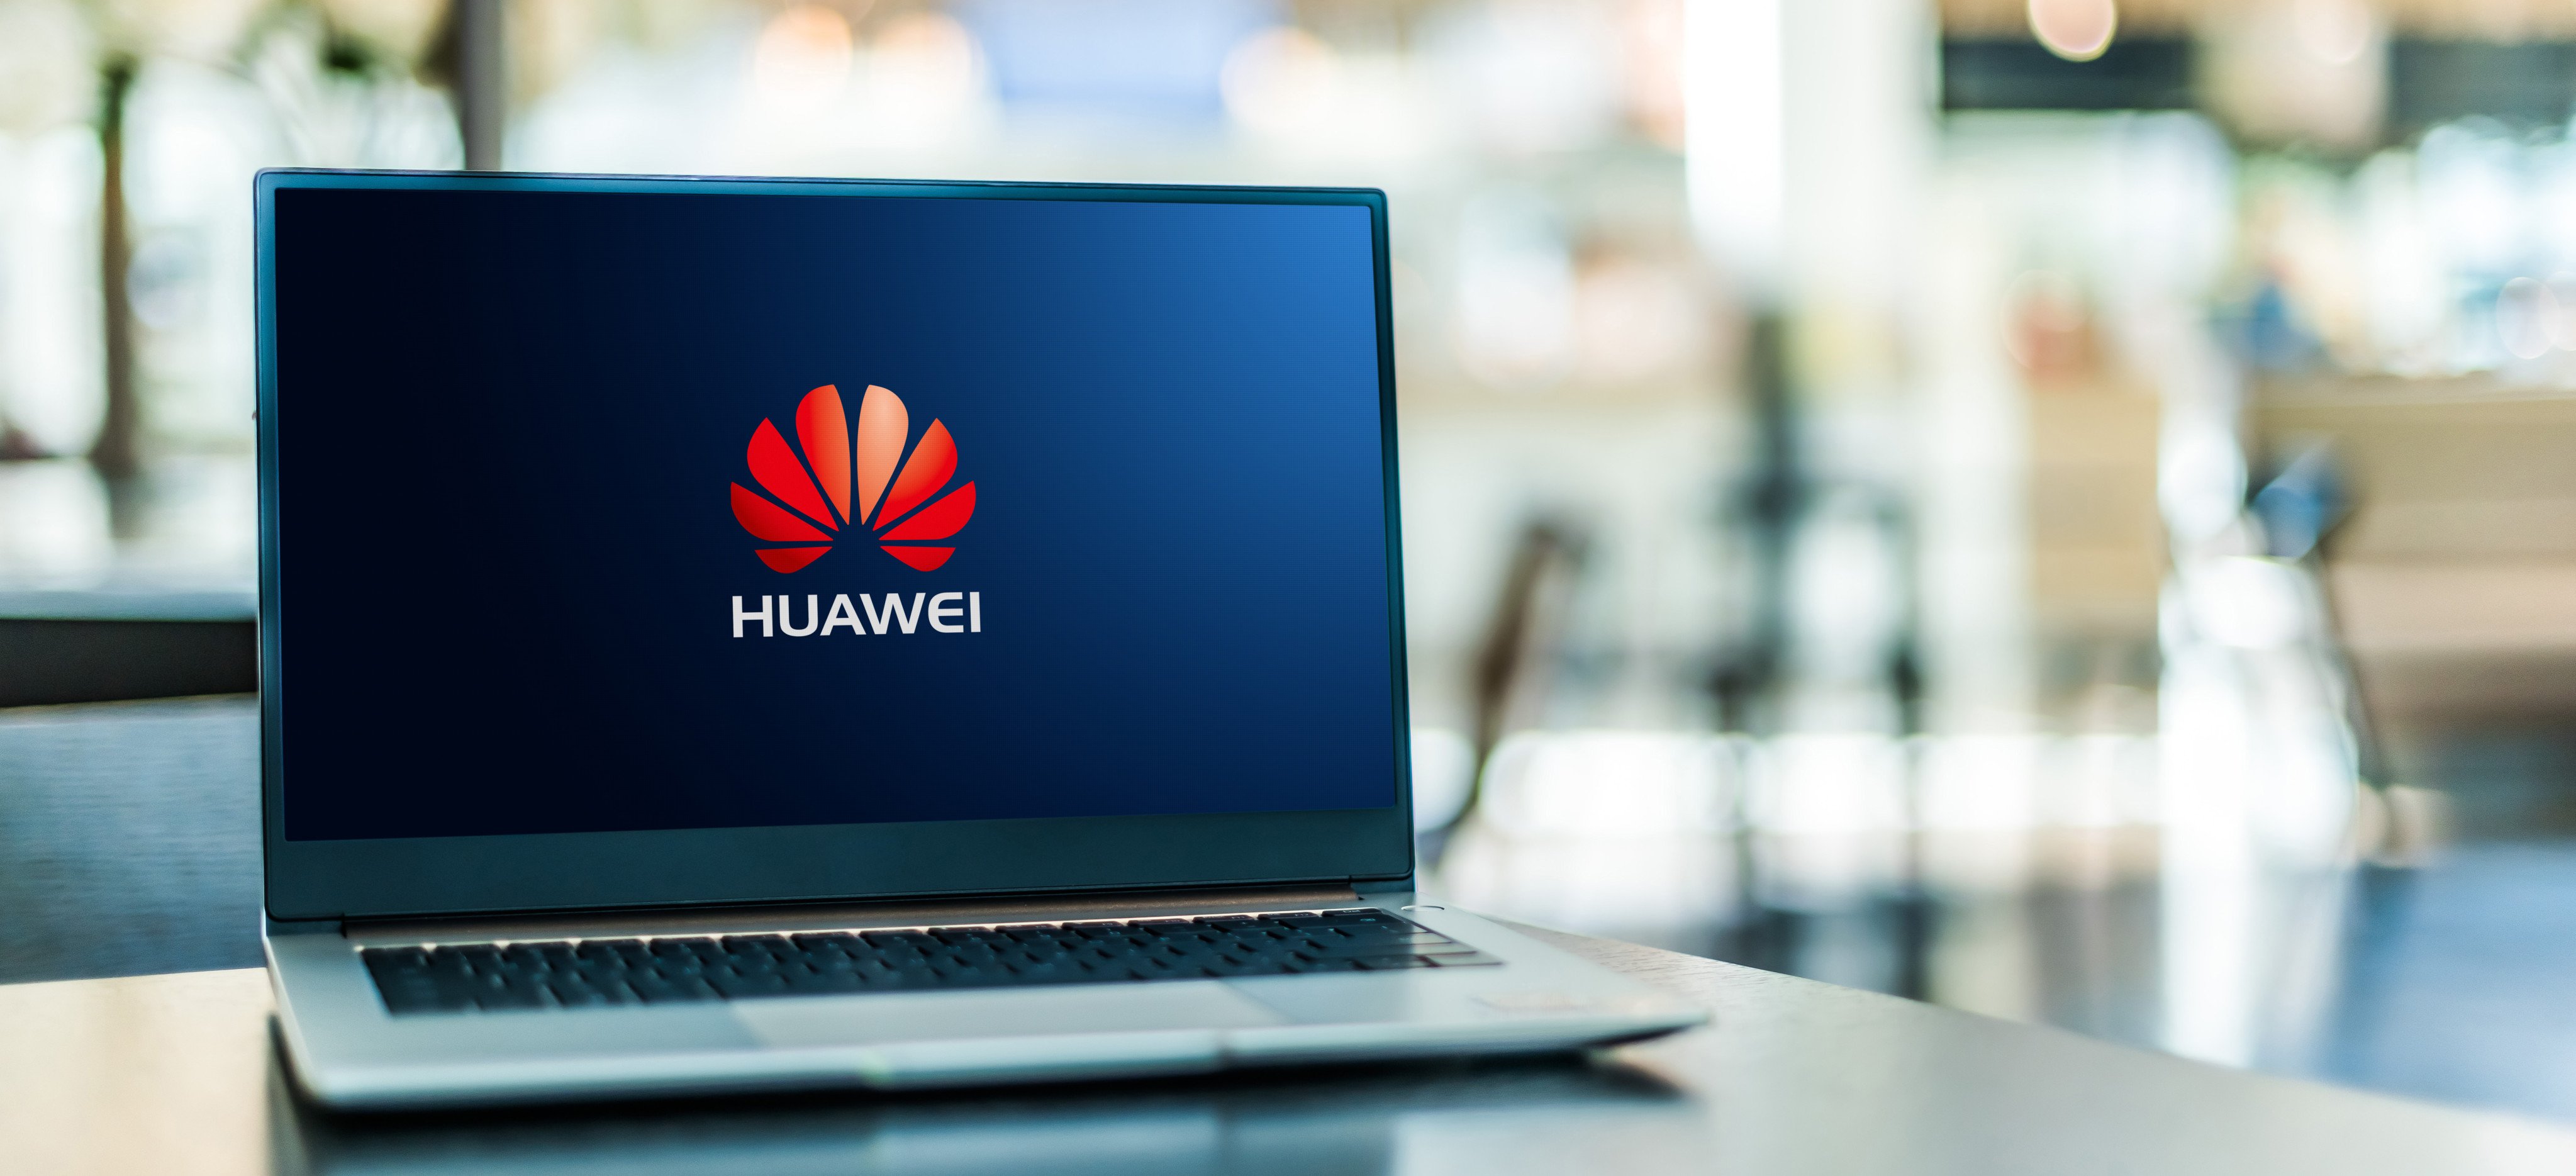 Huawei Technologies Co’s launch of  new commercial office products reflects the company’s focus on becoming a major solutions provider for enterprises and governments. Photo: Shutterstock